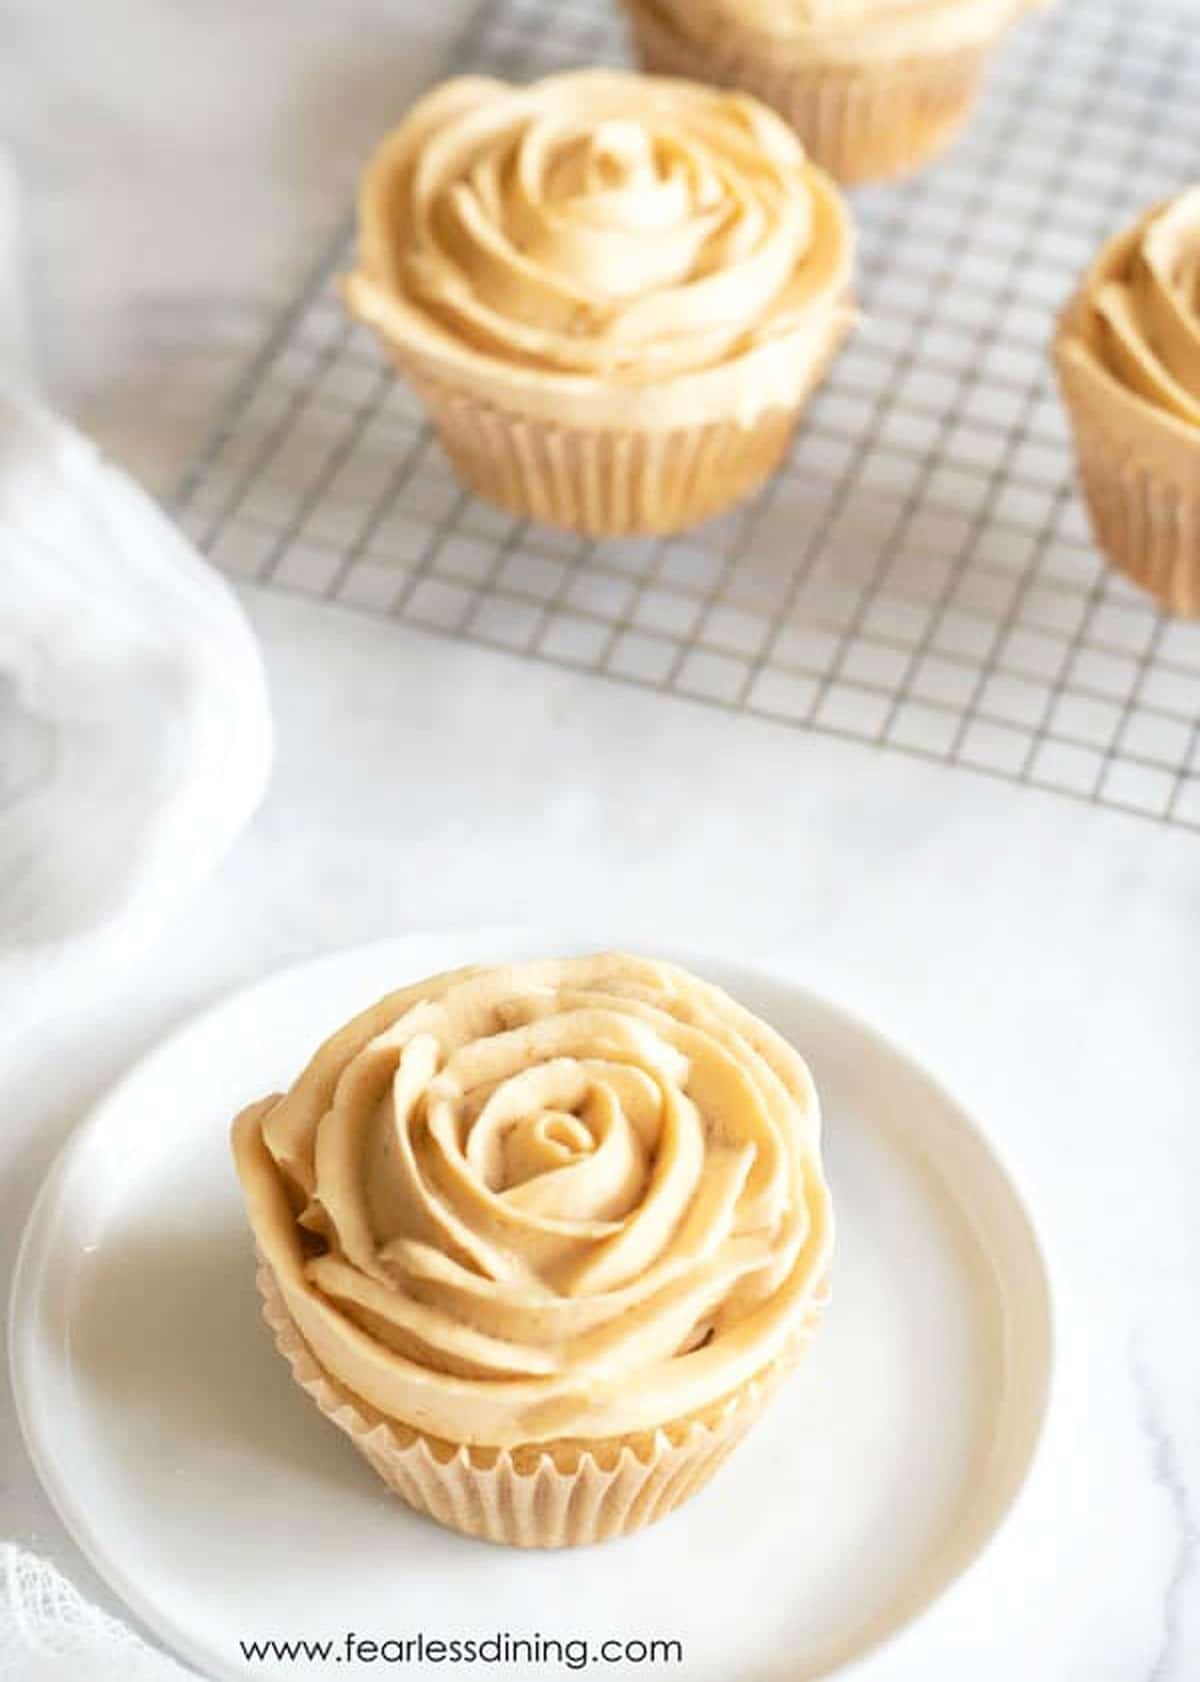 A caramel cupcake with frosting piped like flower petals on a plate.